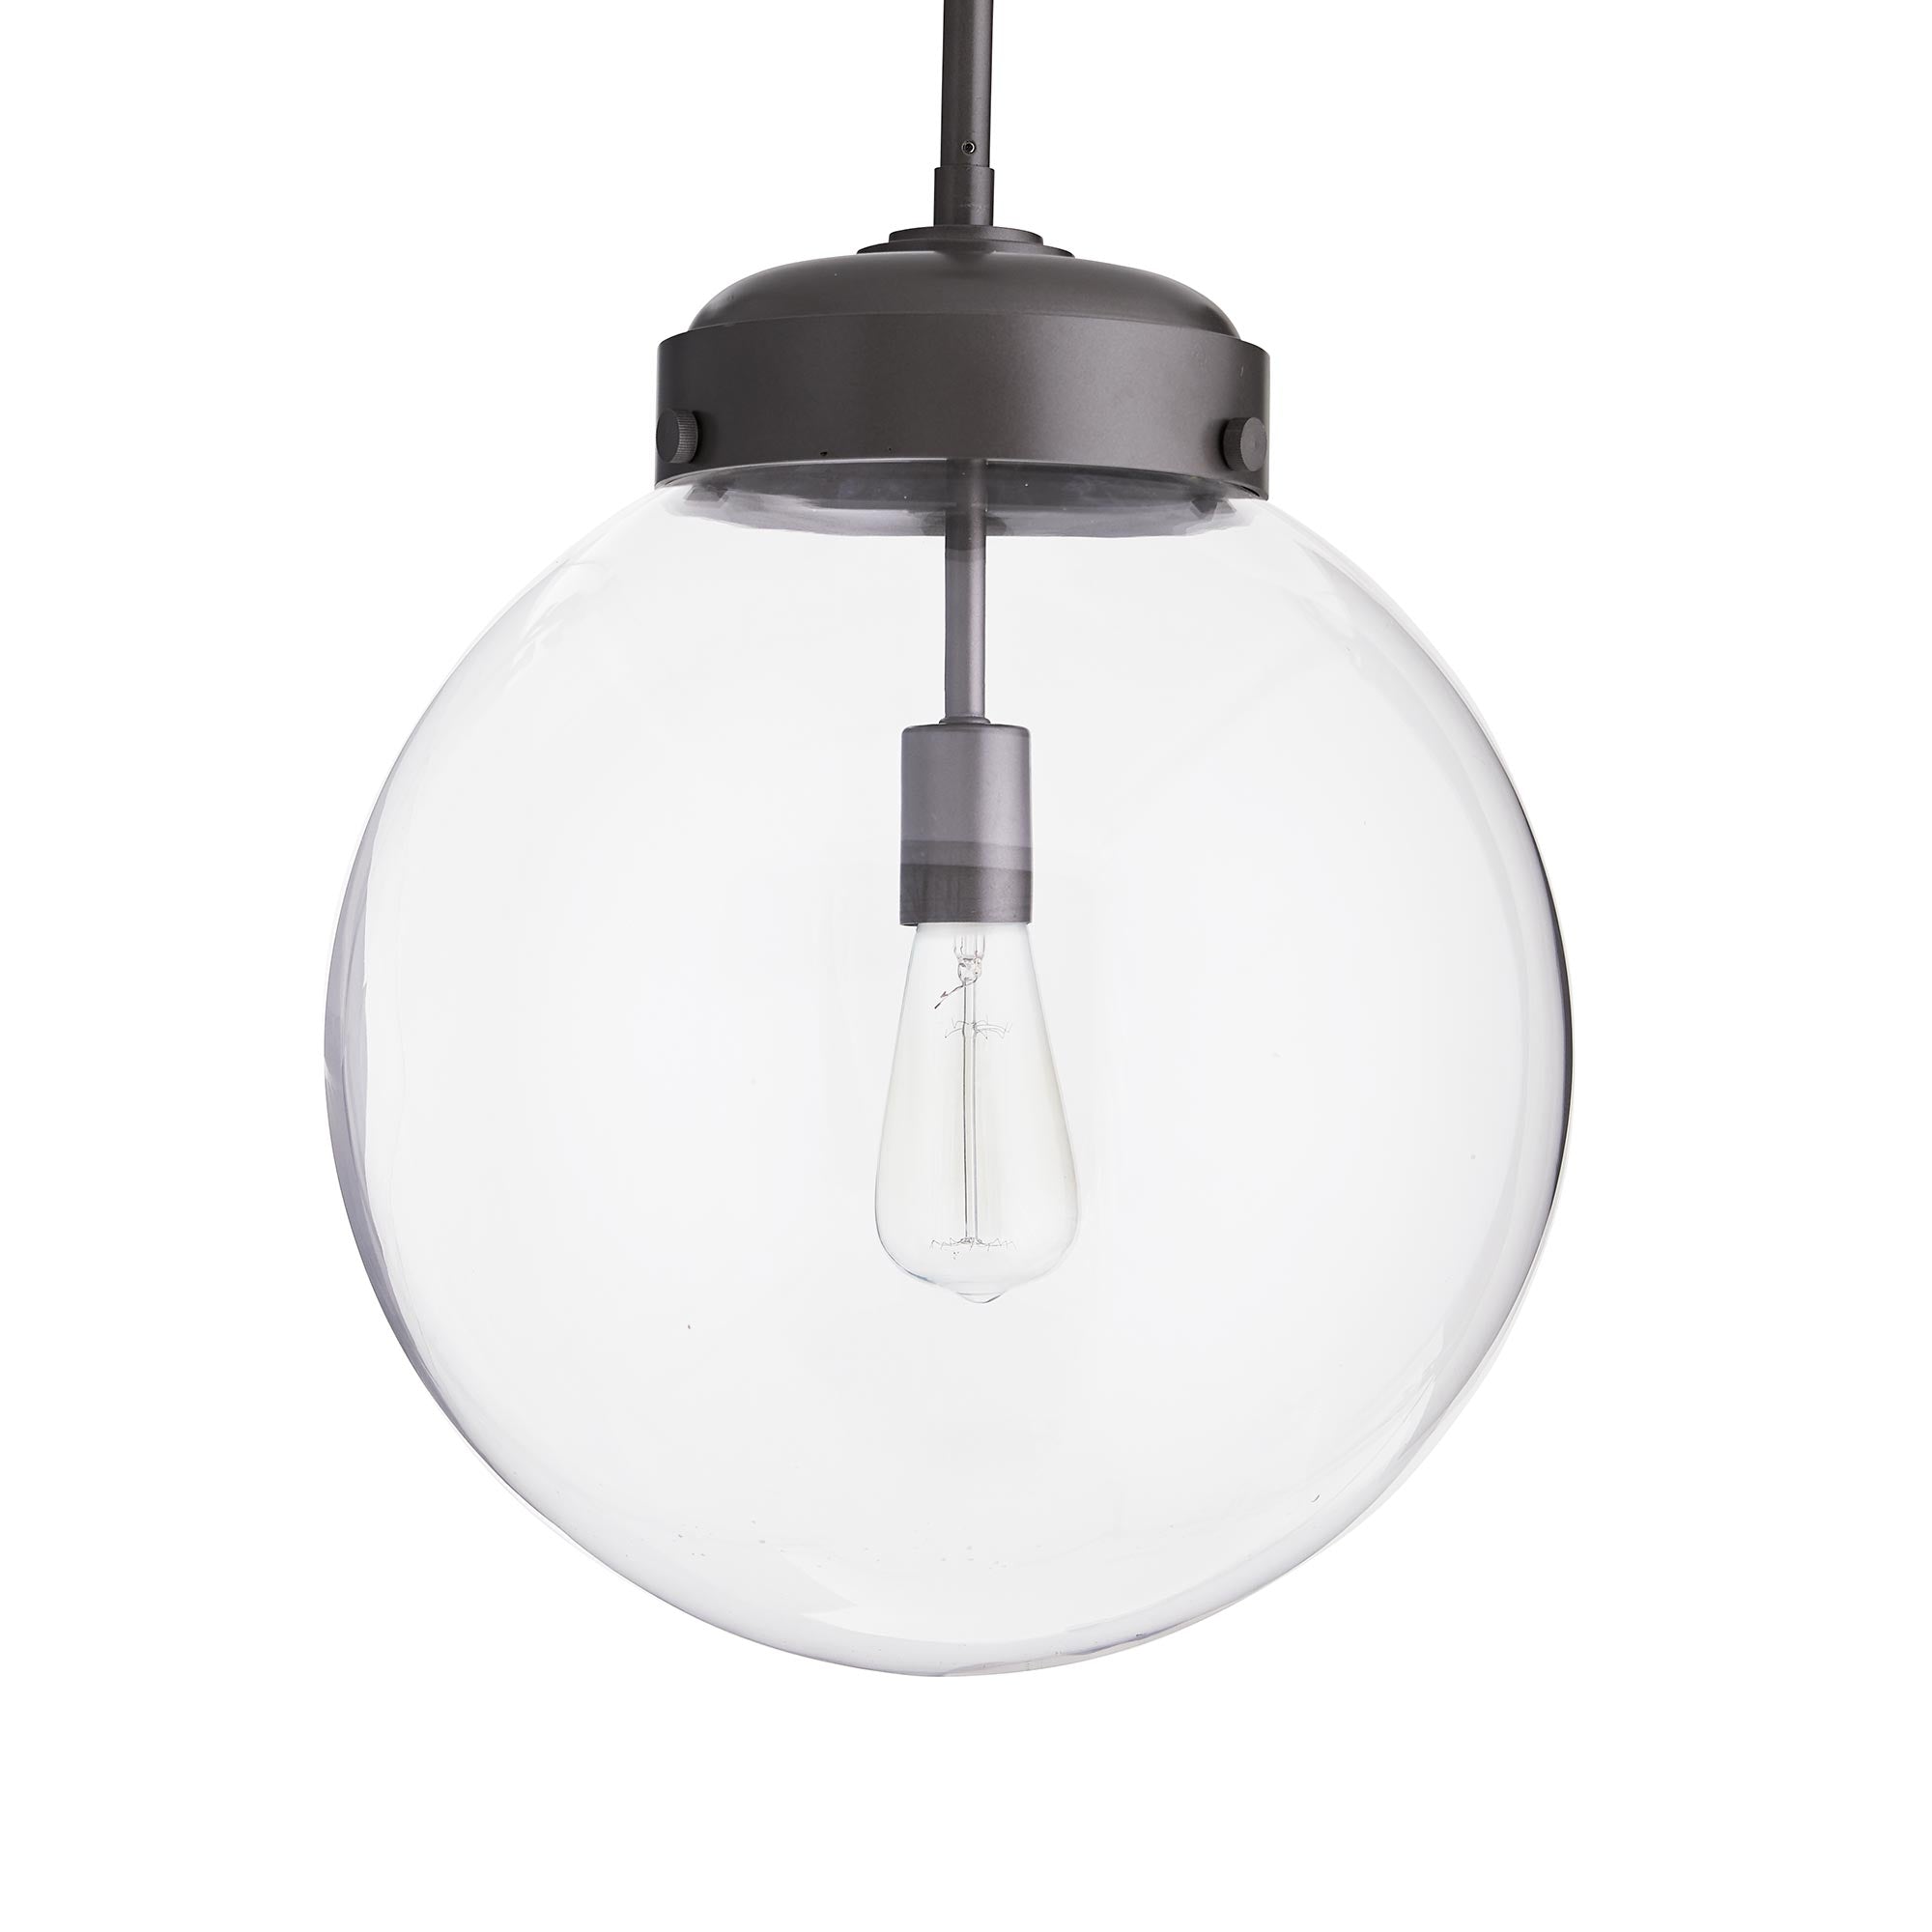 Arteriors Reeves Large Outdoor Pendant 49207